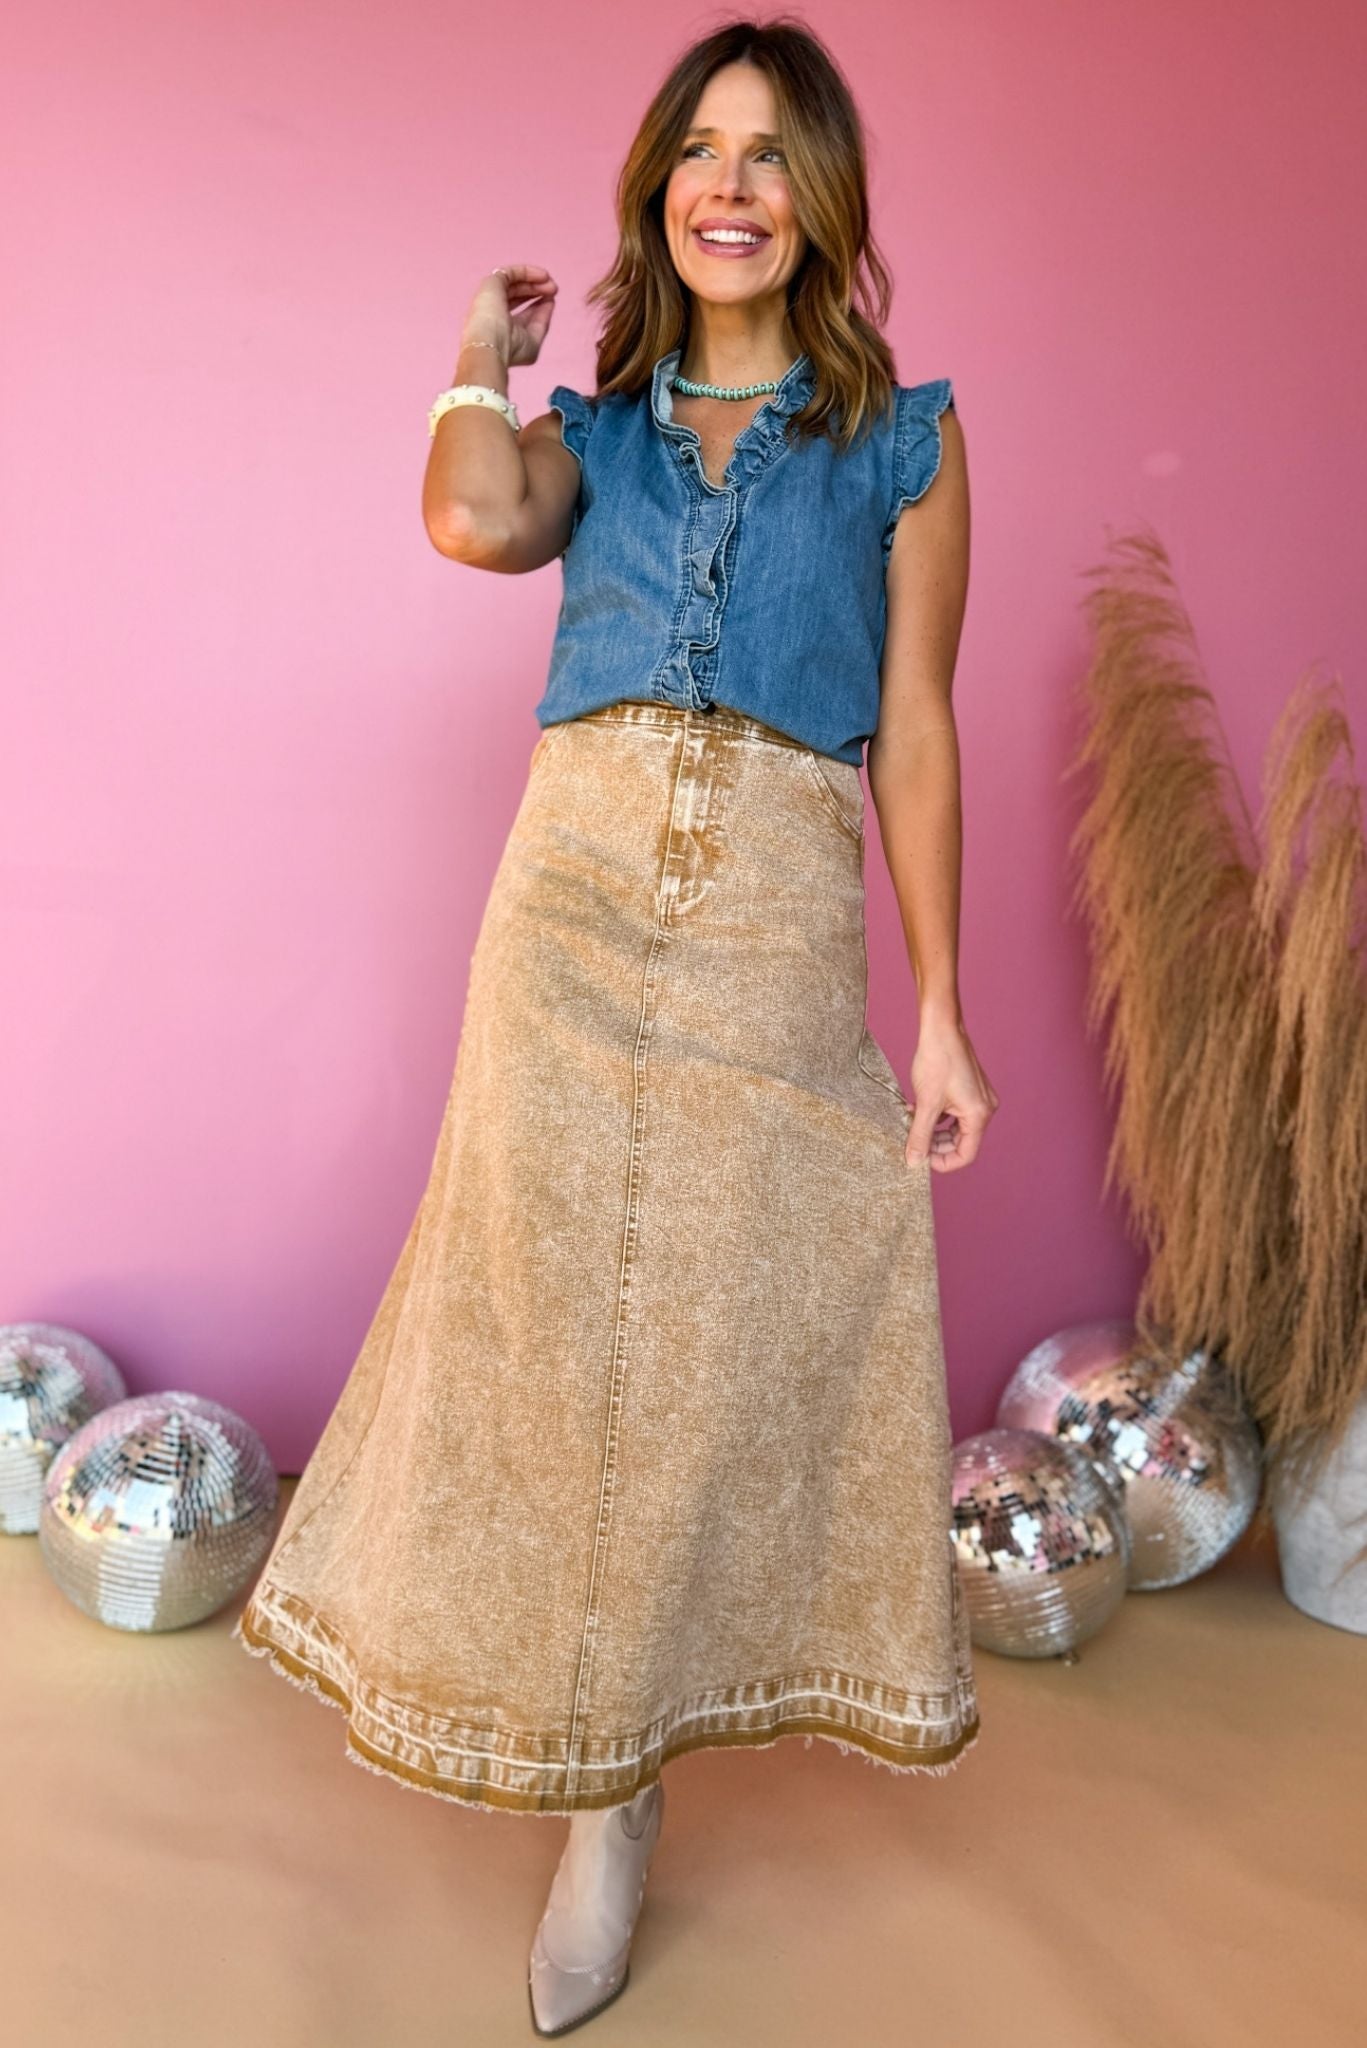 Blue Denim Double Ruffle Detail Sleeveless Top, Western top, western style, rodeo style, concert style, must have concert, must have style, elevated top, elevated style, spring style, mom style, shop style your senses by Mallory Fitzsimmons, says by Mallory Fitzsimmons